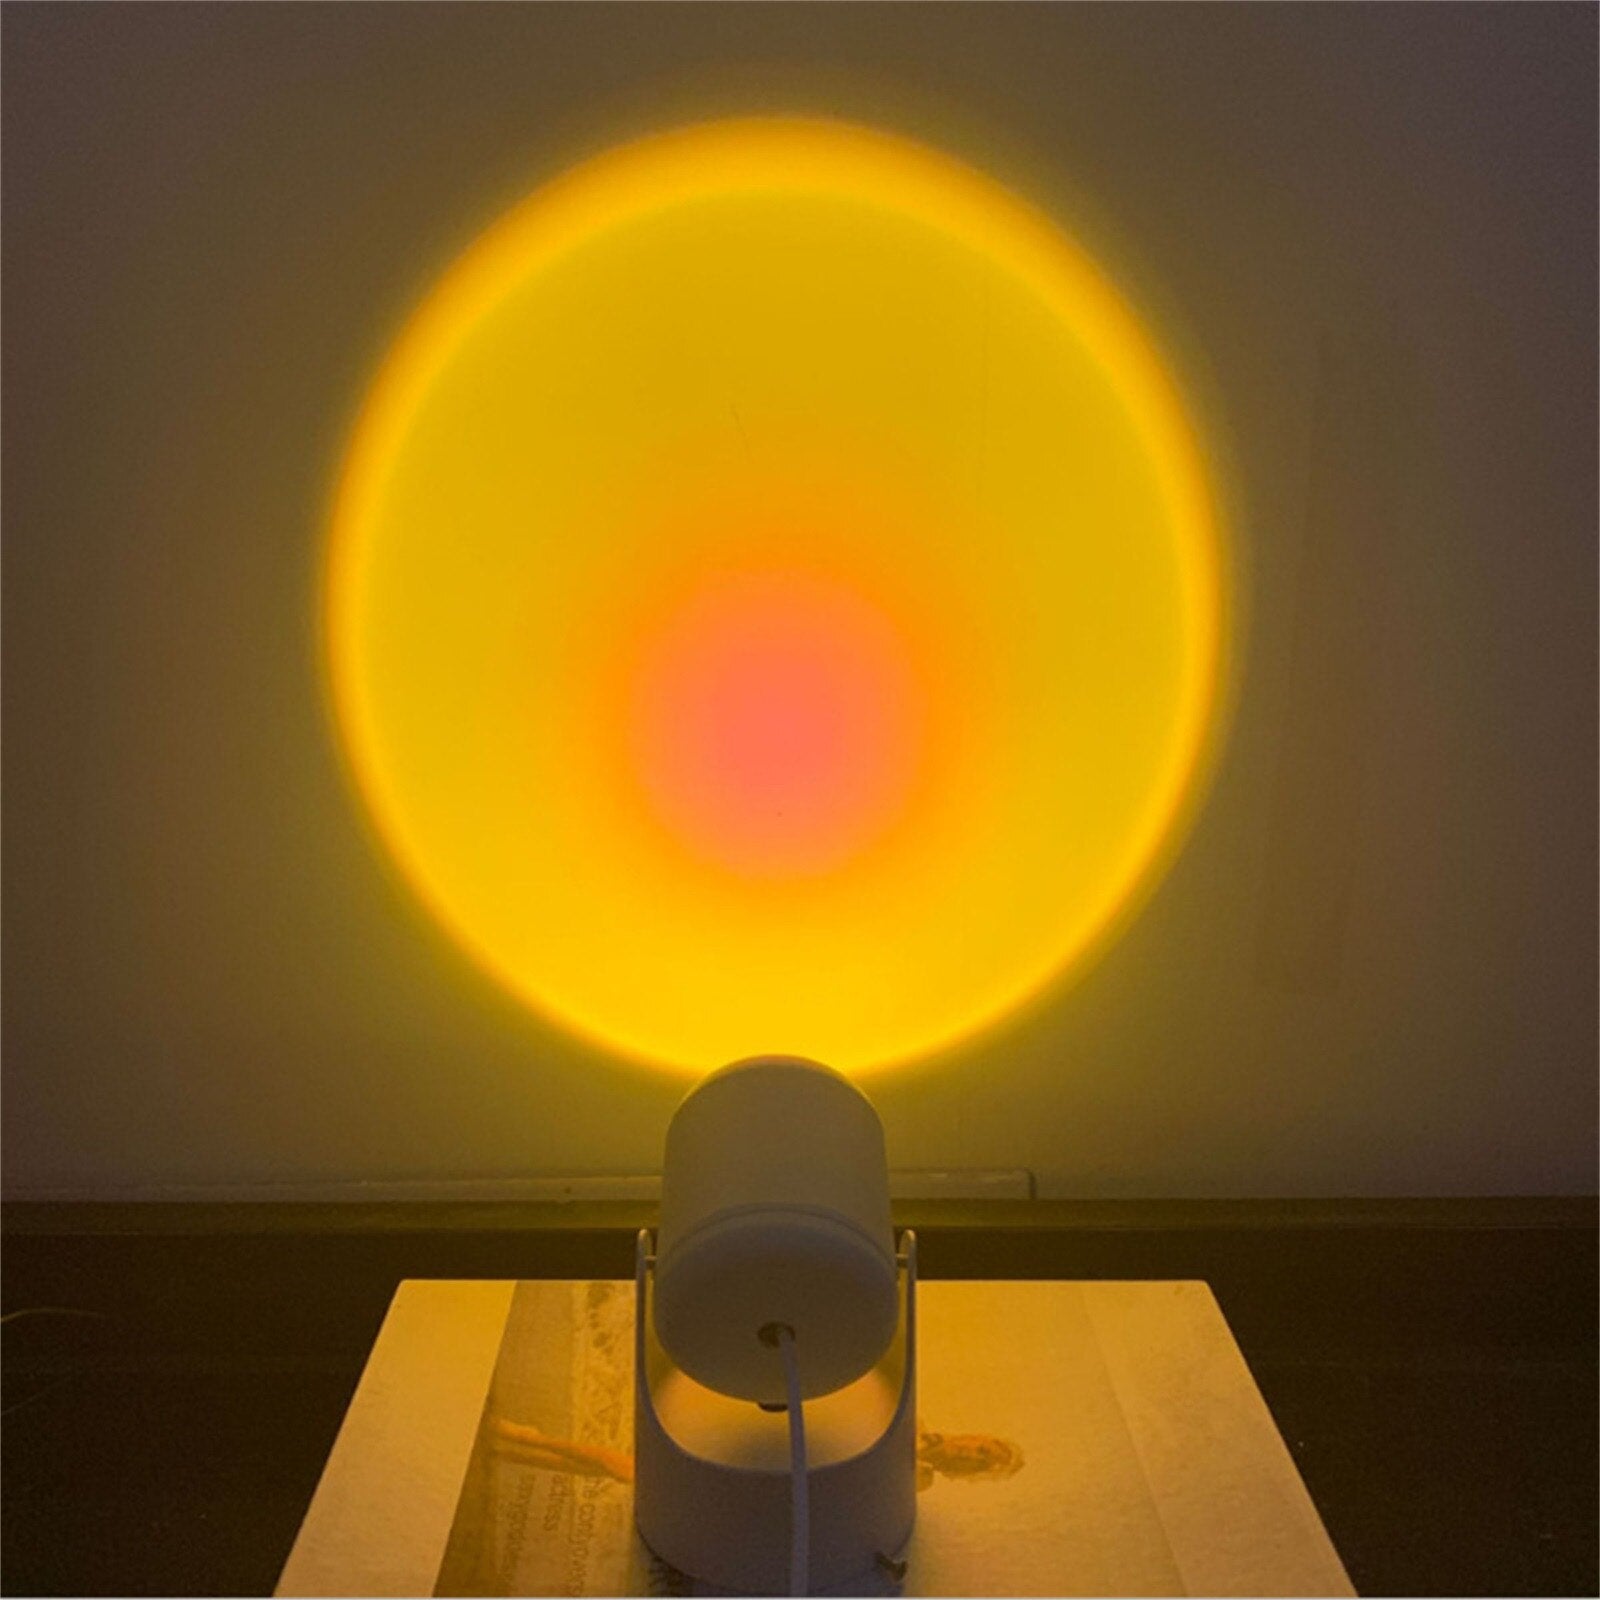 Sunset projector lamp projecting a large, bright, yellow-orange glow on a wall, providing a warm and inviting light source for a vintage room or boho room decor.